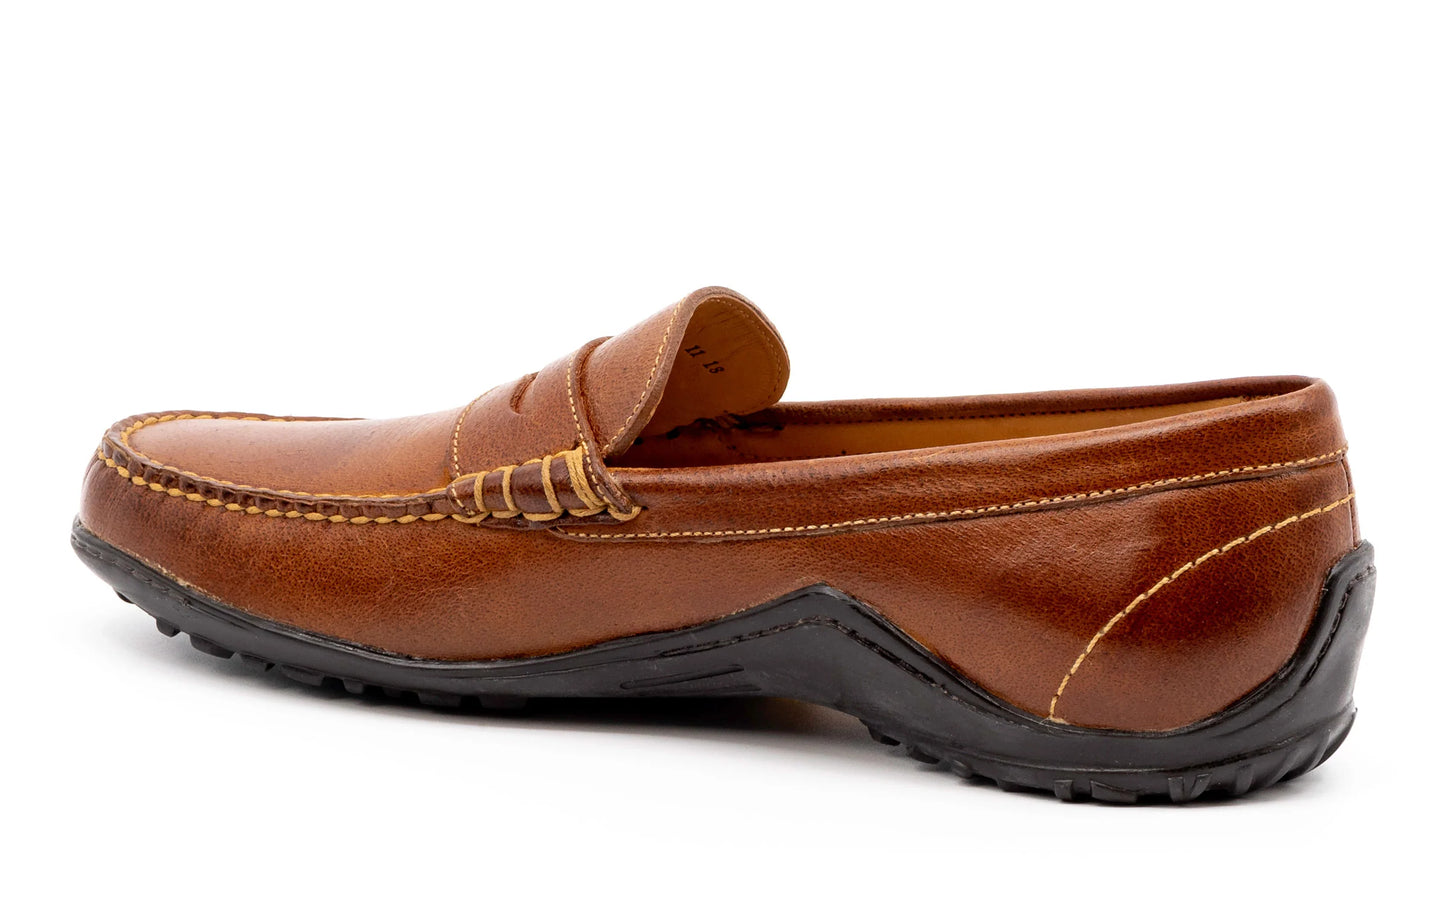 Bill Water Buffalo Leather Penny Loafer by Martin Dingman